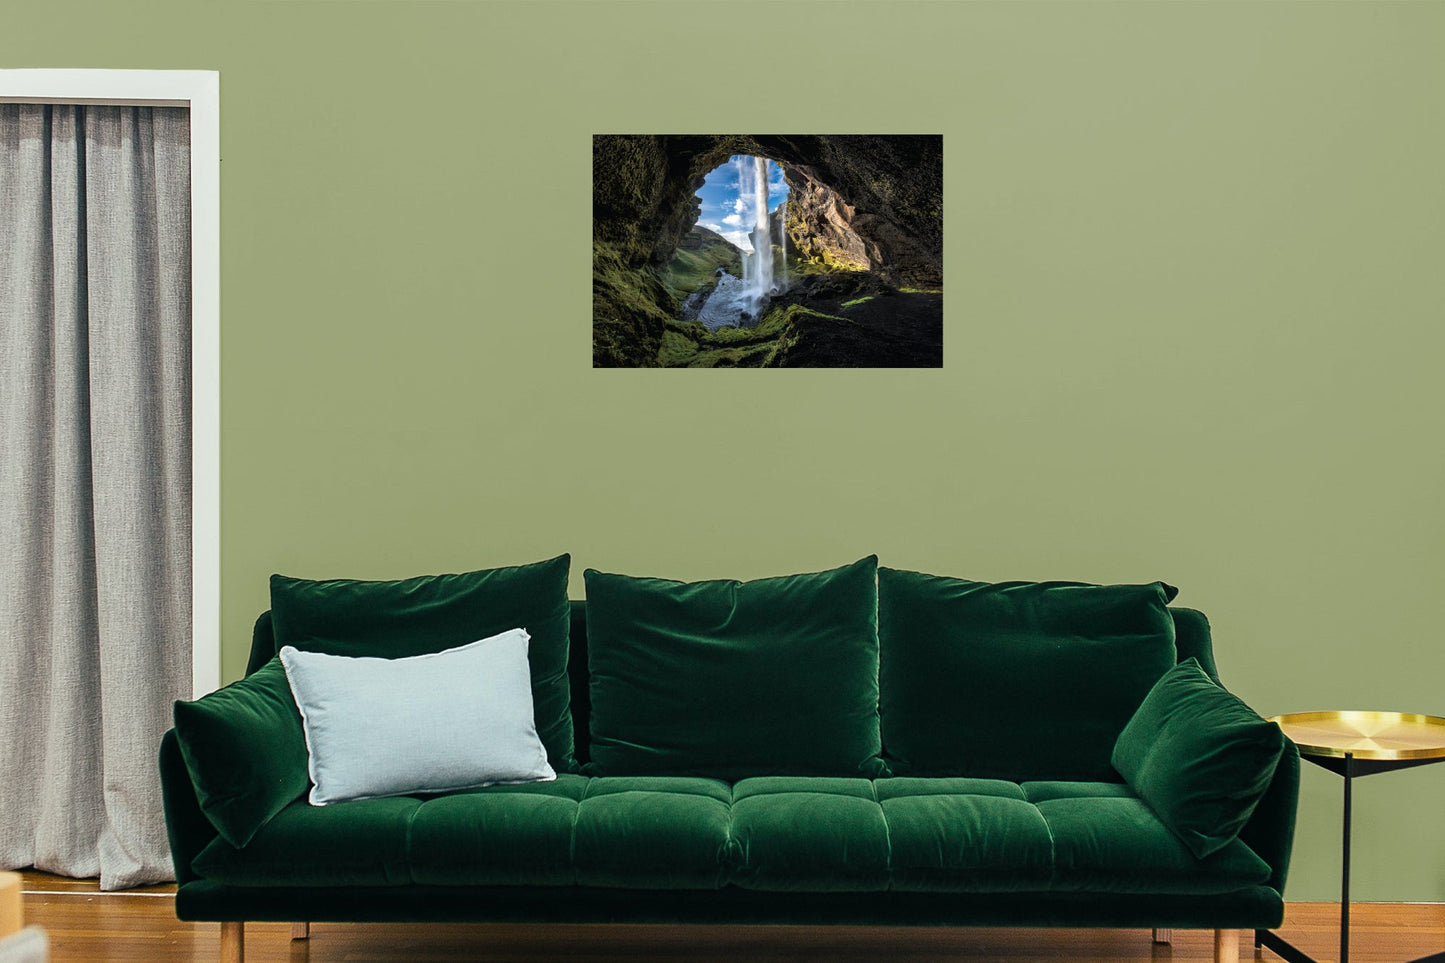 Popular Landmarks: Iceland Realistic Poster - Removable Adhesive Decal